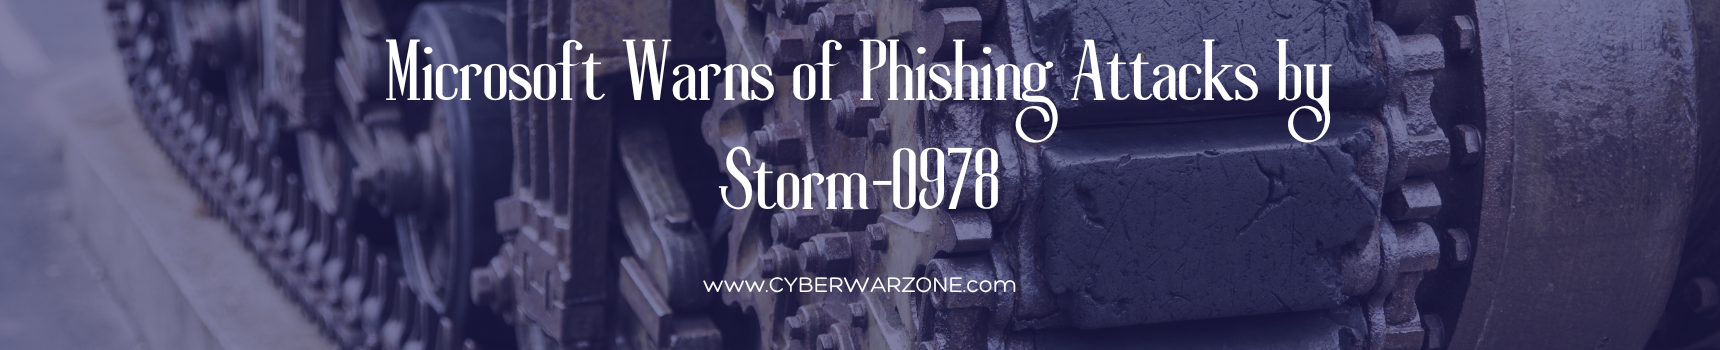 Microsoft Warns of Phishing Attacks by Storm-0978 Group Targeting Defense and Government Entities